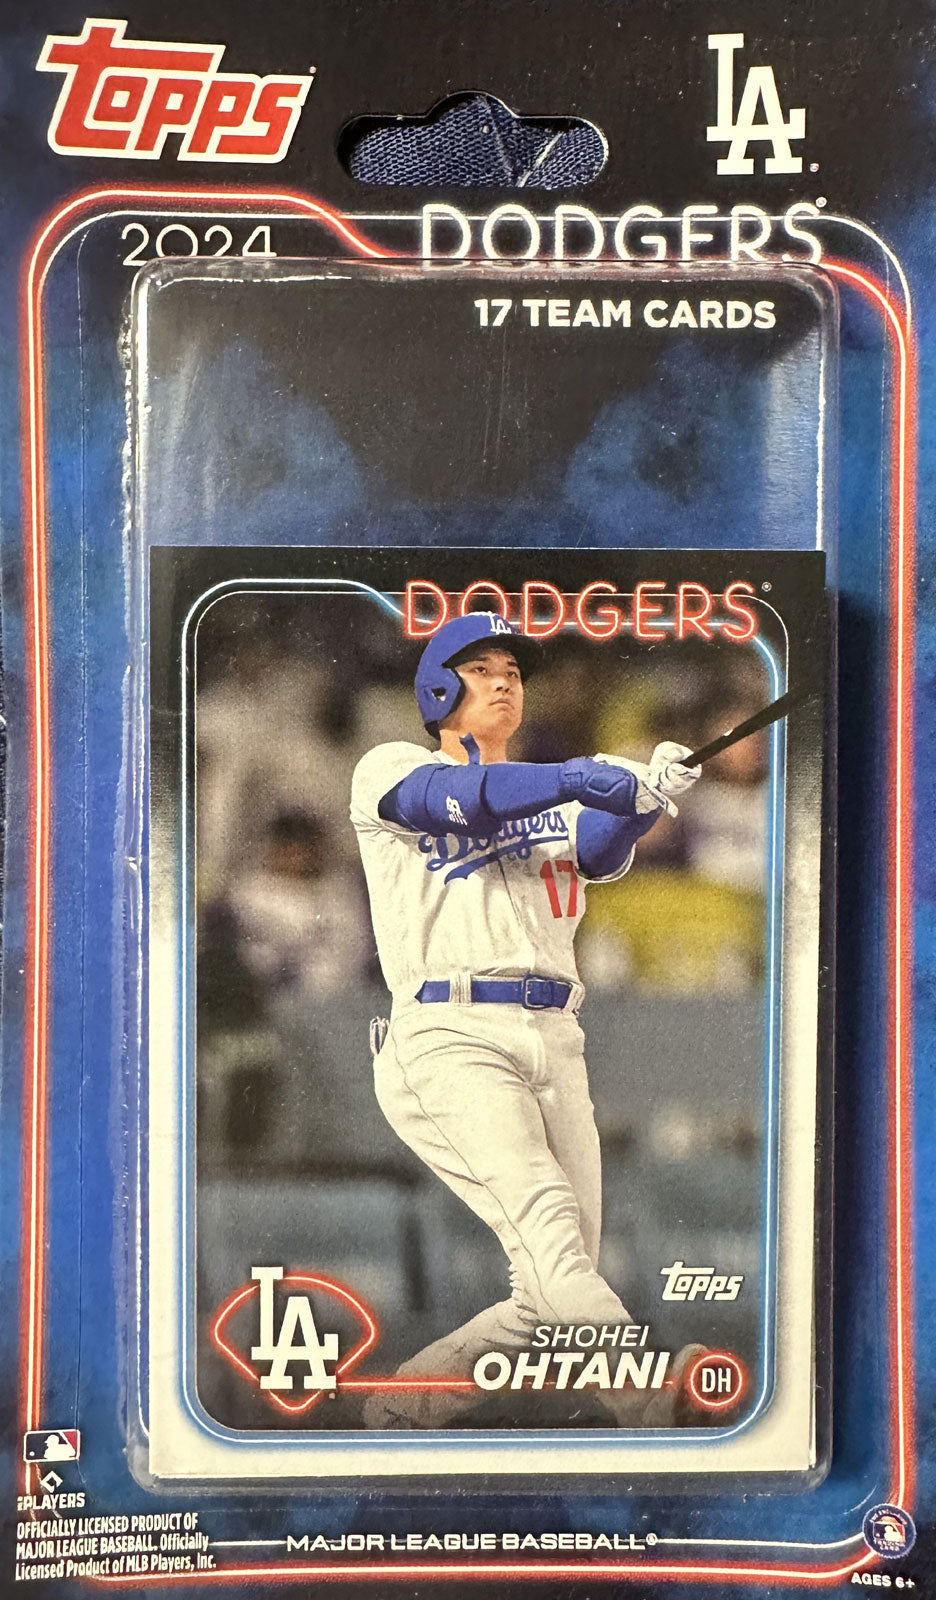 Los Angeles Dodgers 2024 Topps Factory Sealed 17 Card Team Set with First Shohei Ohtani Card #LAD-3 Plus